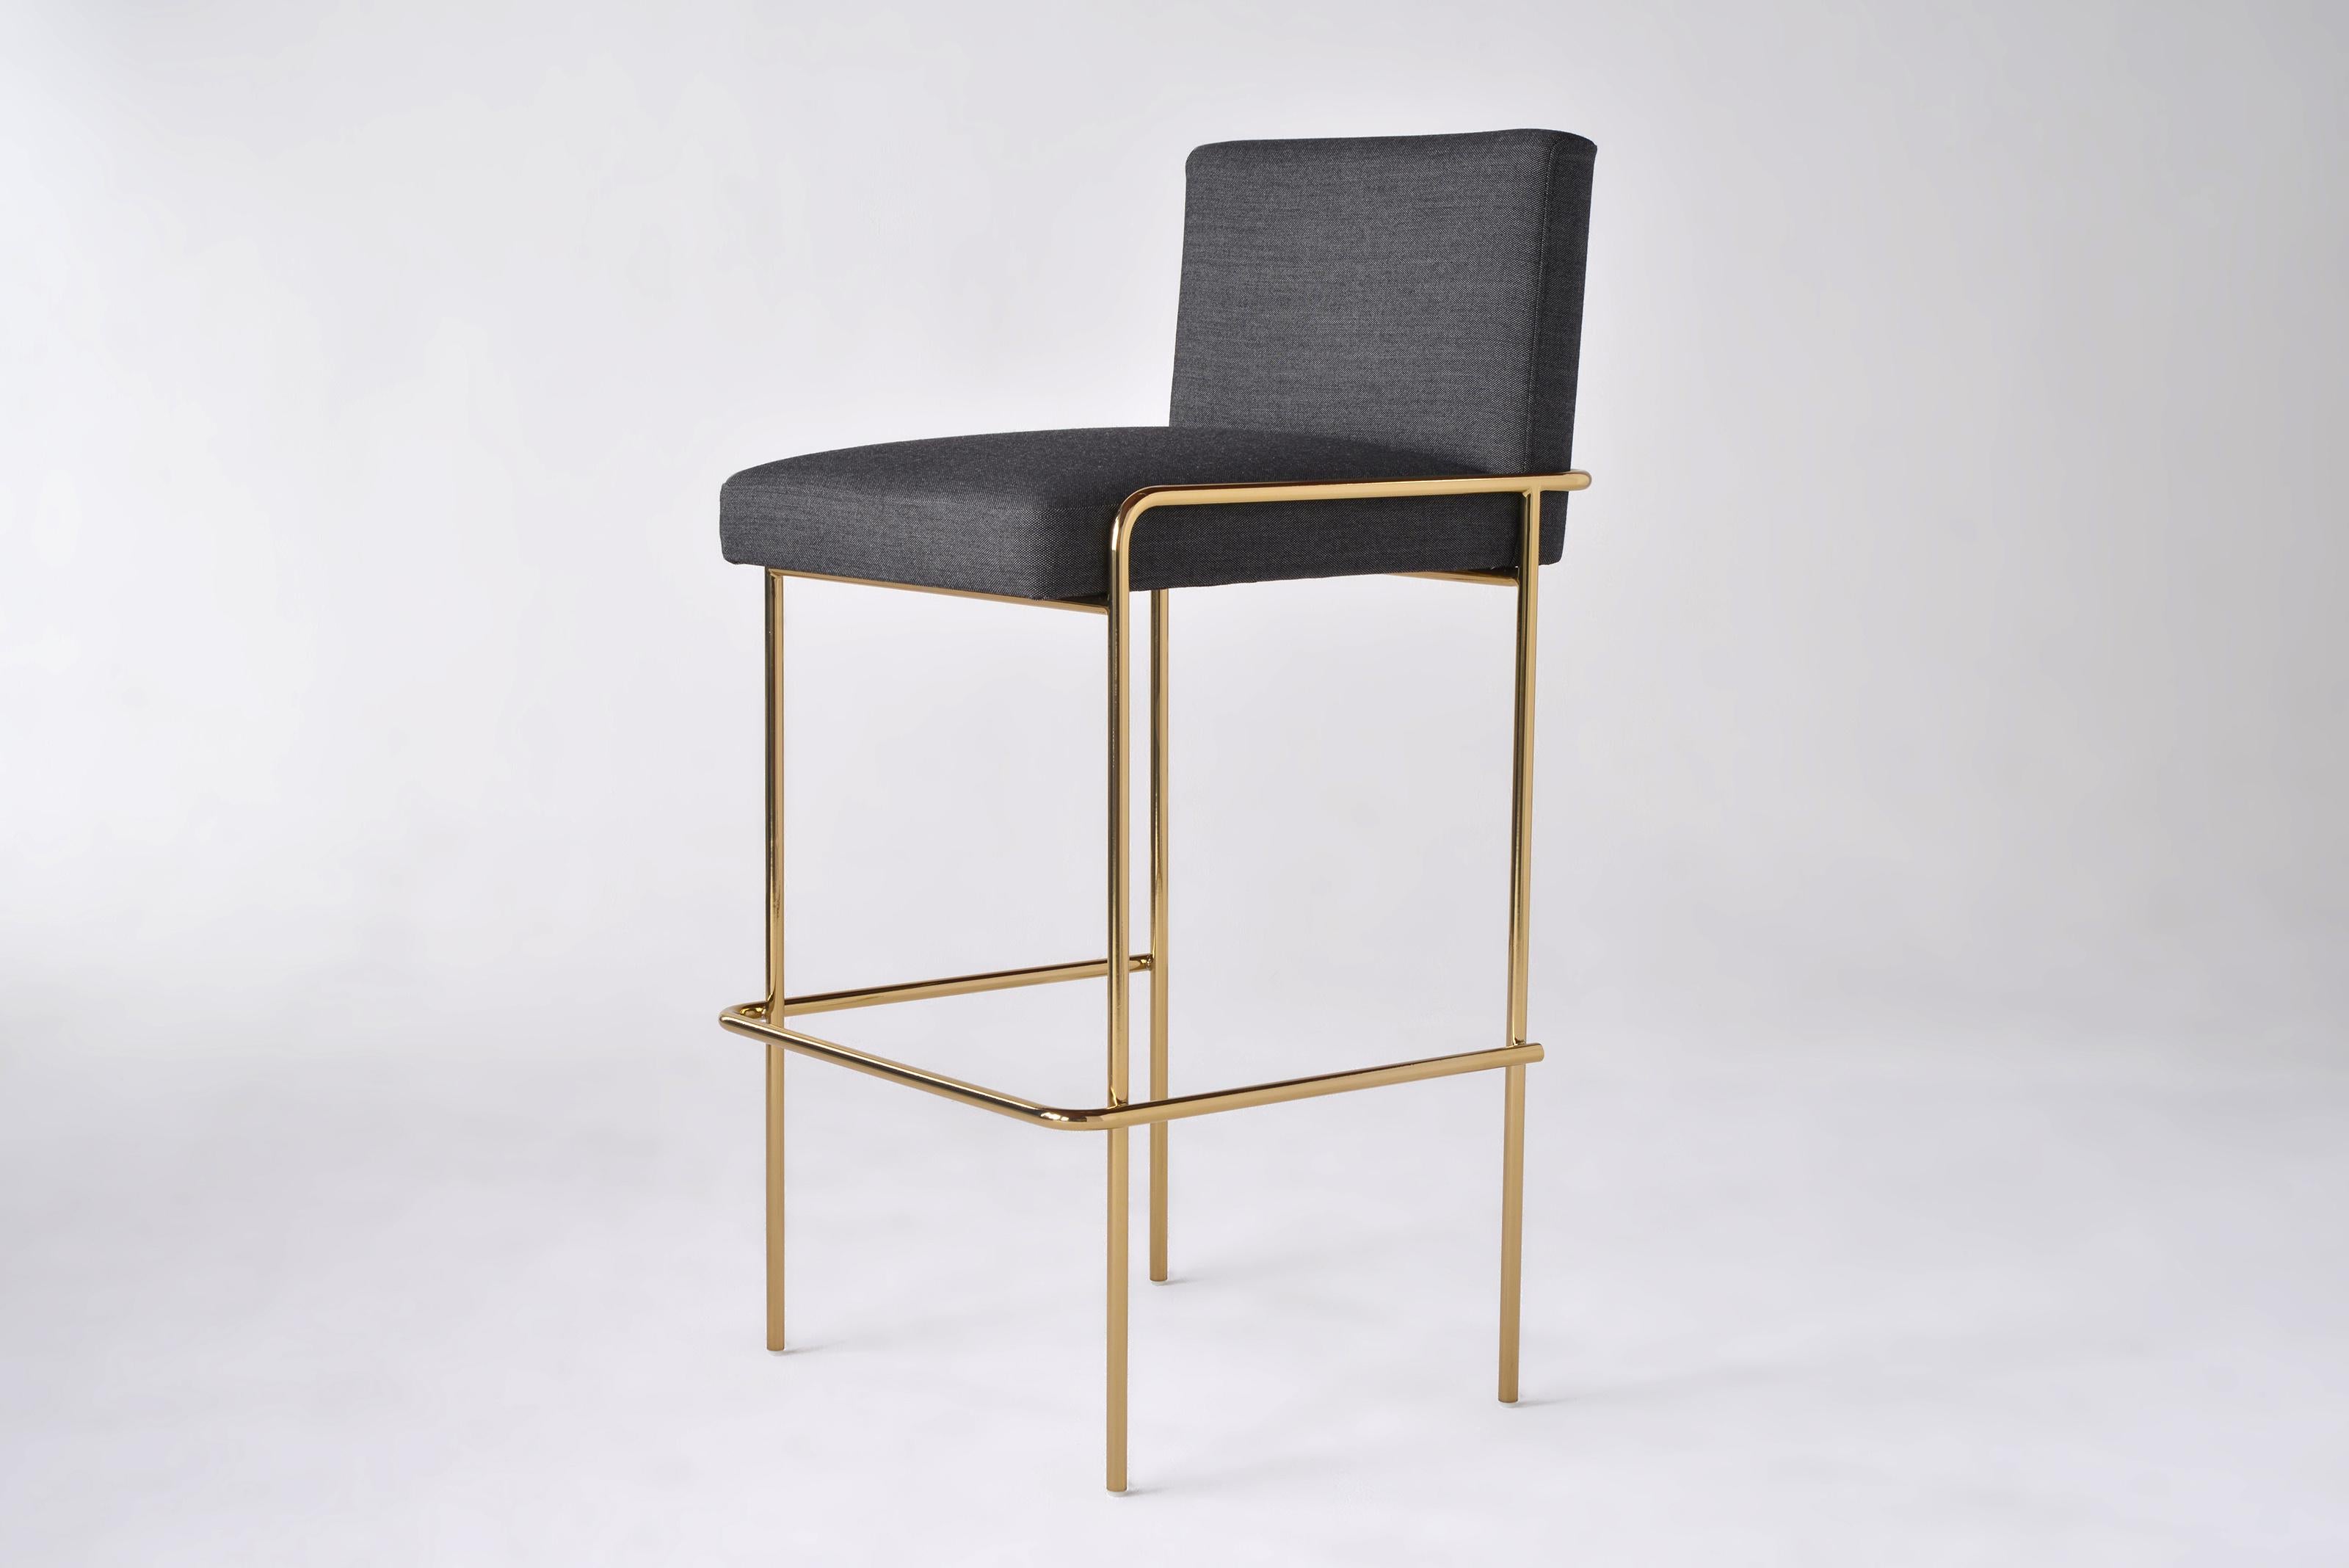 Trolley Bar Stool by Phase Design
Dimensions: D 54 x W 52.1 x H 99.1 cm. Seat Height: 73.7 cm.
Materials: Upholstery and smoked brass. 

Solid steel bar available in a smoked brass, polished chrome, burnt copper, or powder coat finish with